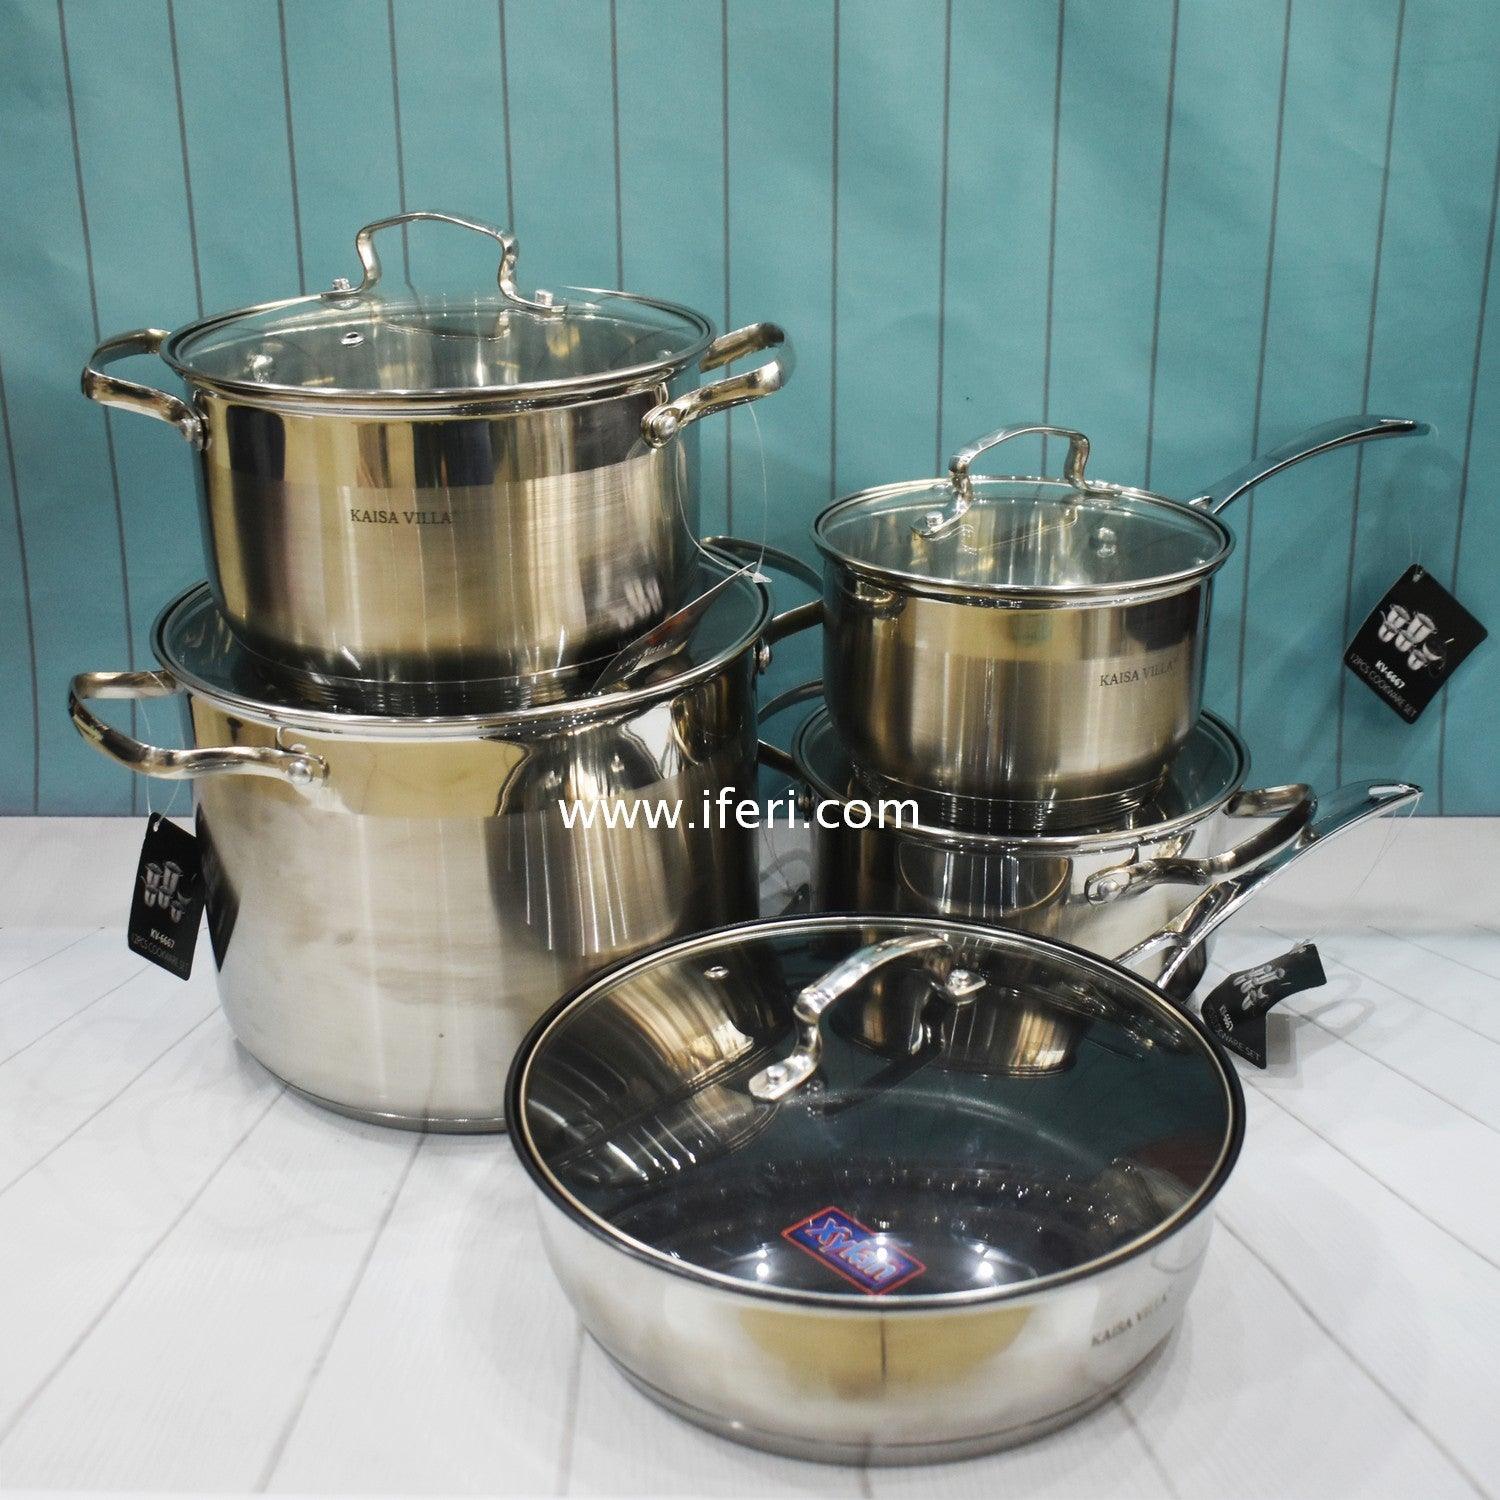 12 Pcs Stainless Steel Cookware Set With Lid KV6667 Price in Bangladesh - iferi.com